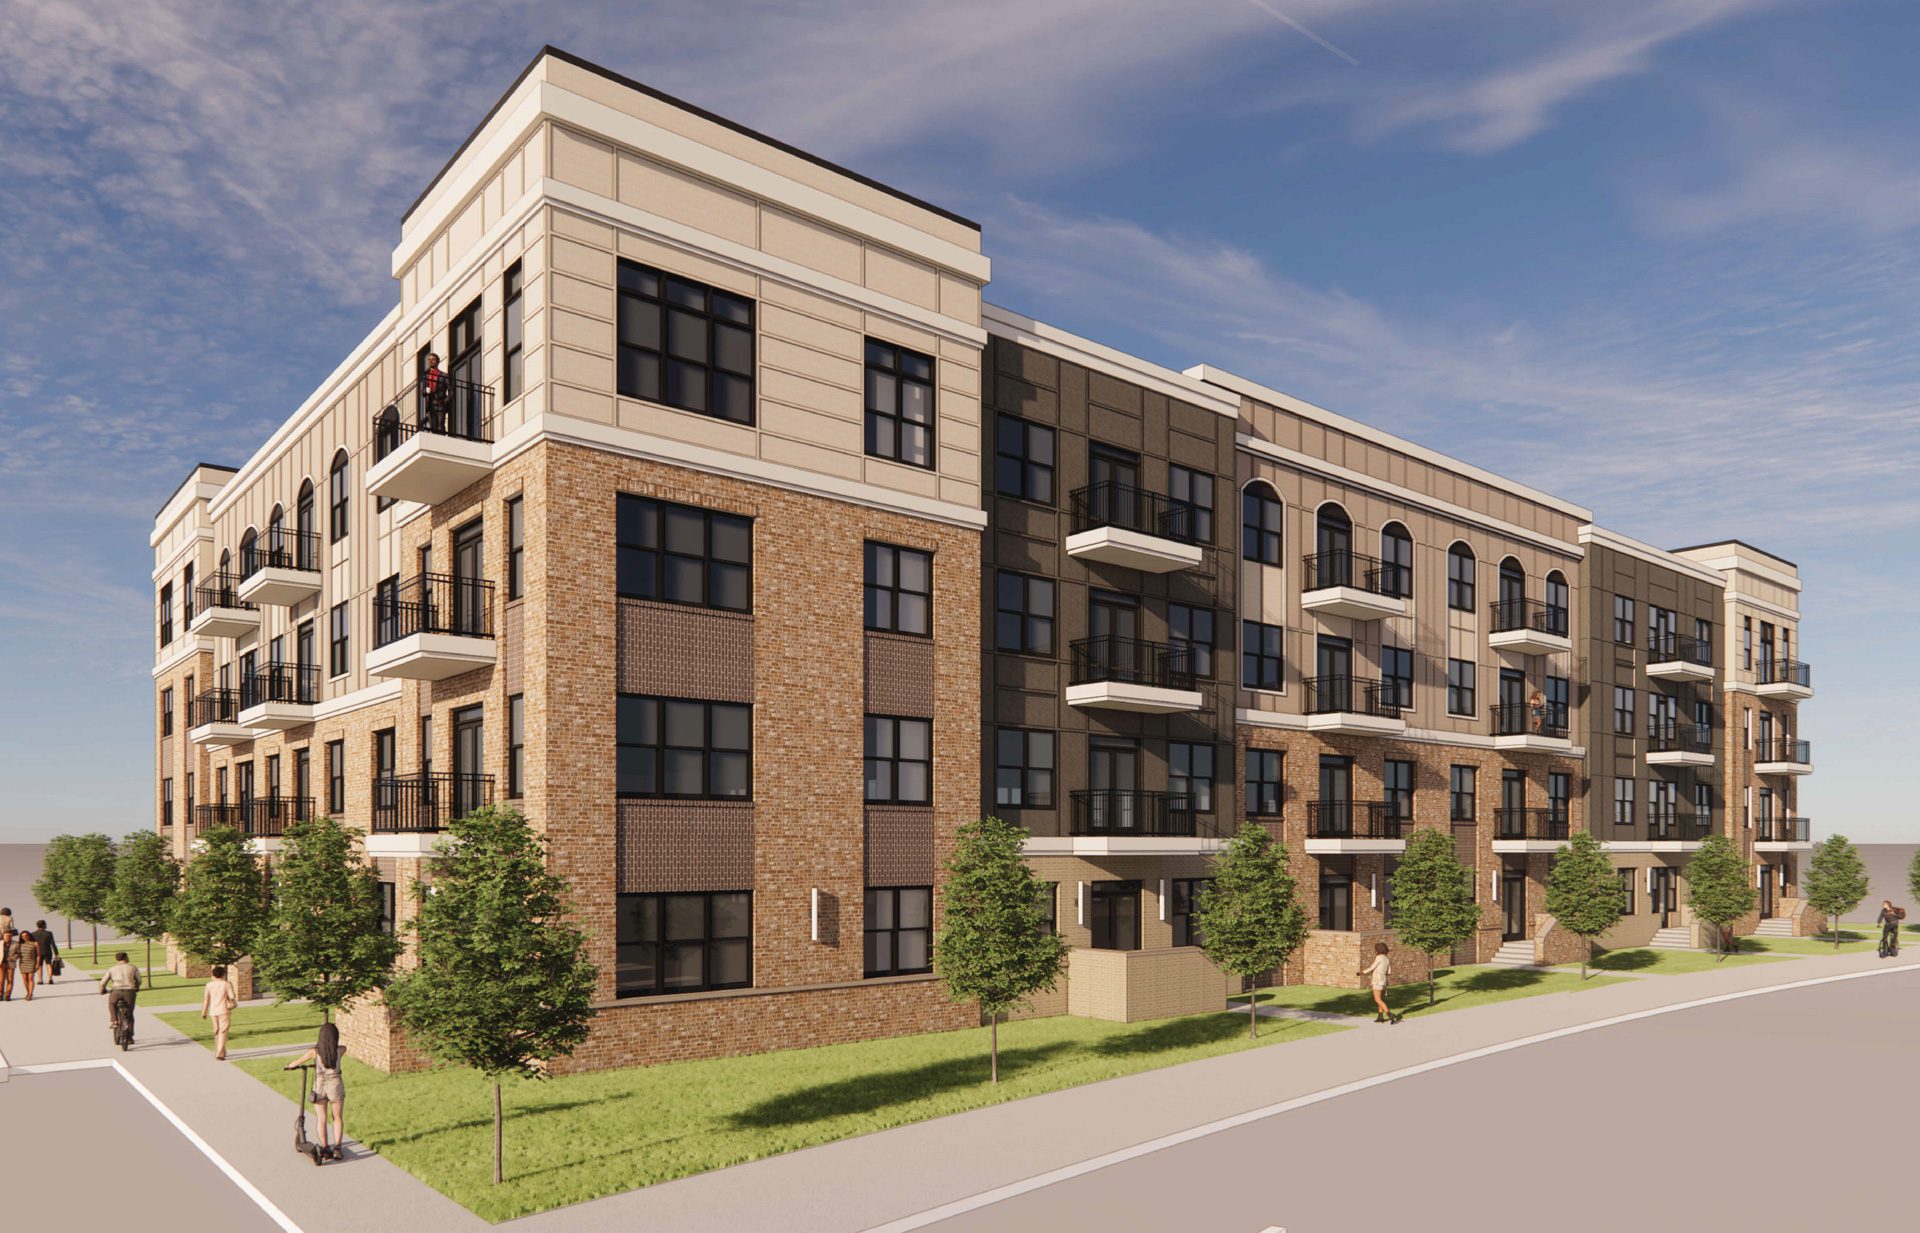 RedStone On Main Phase II rendering of 4-story multifamily building